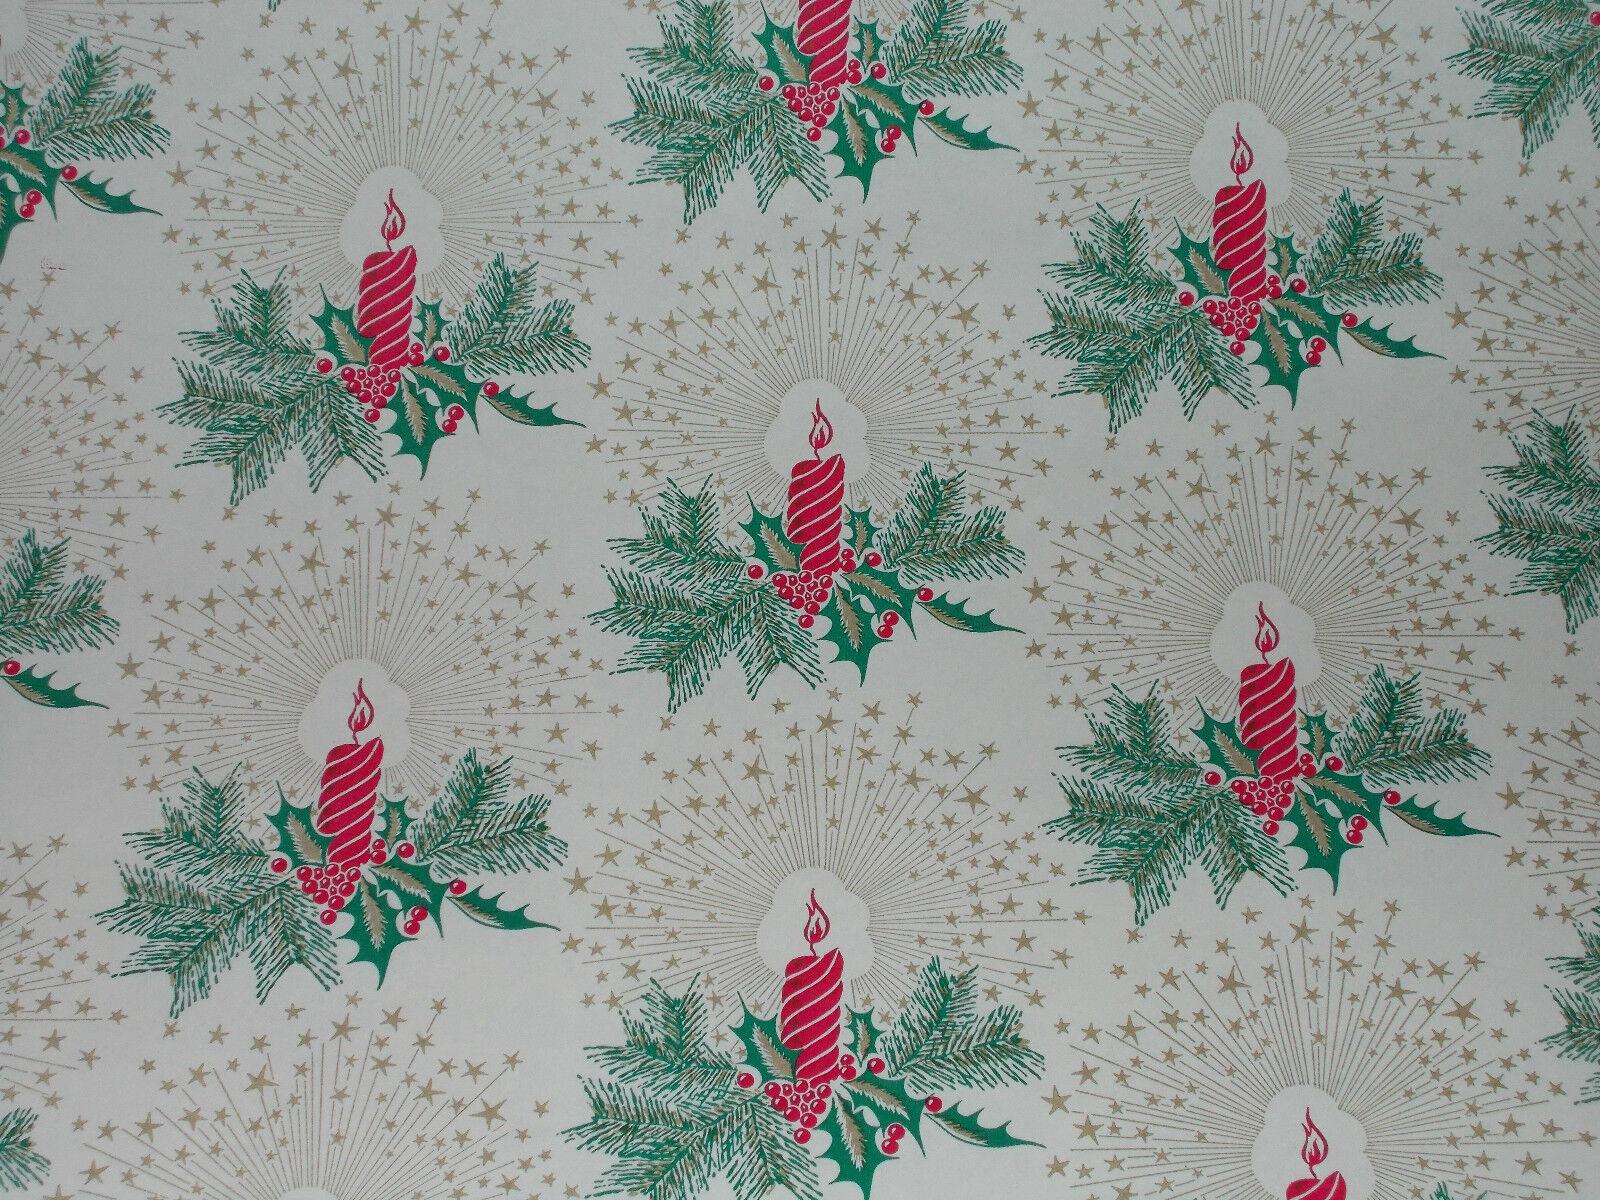 VINTAGE CHRISTMAS OLD SEARS STORE WRAPPING PAPER GIFT WRAP CANDLES 2 YARDS